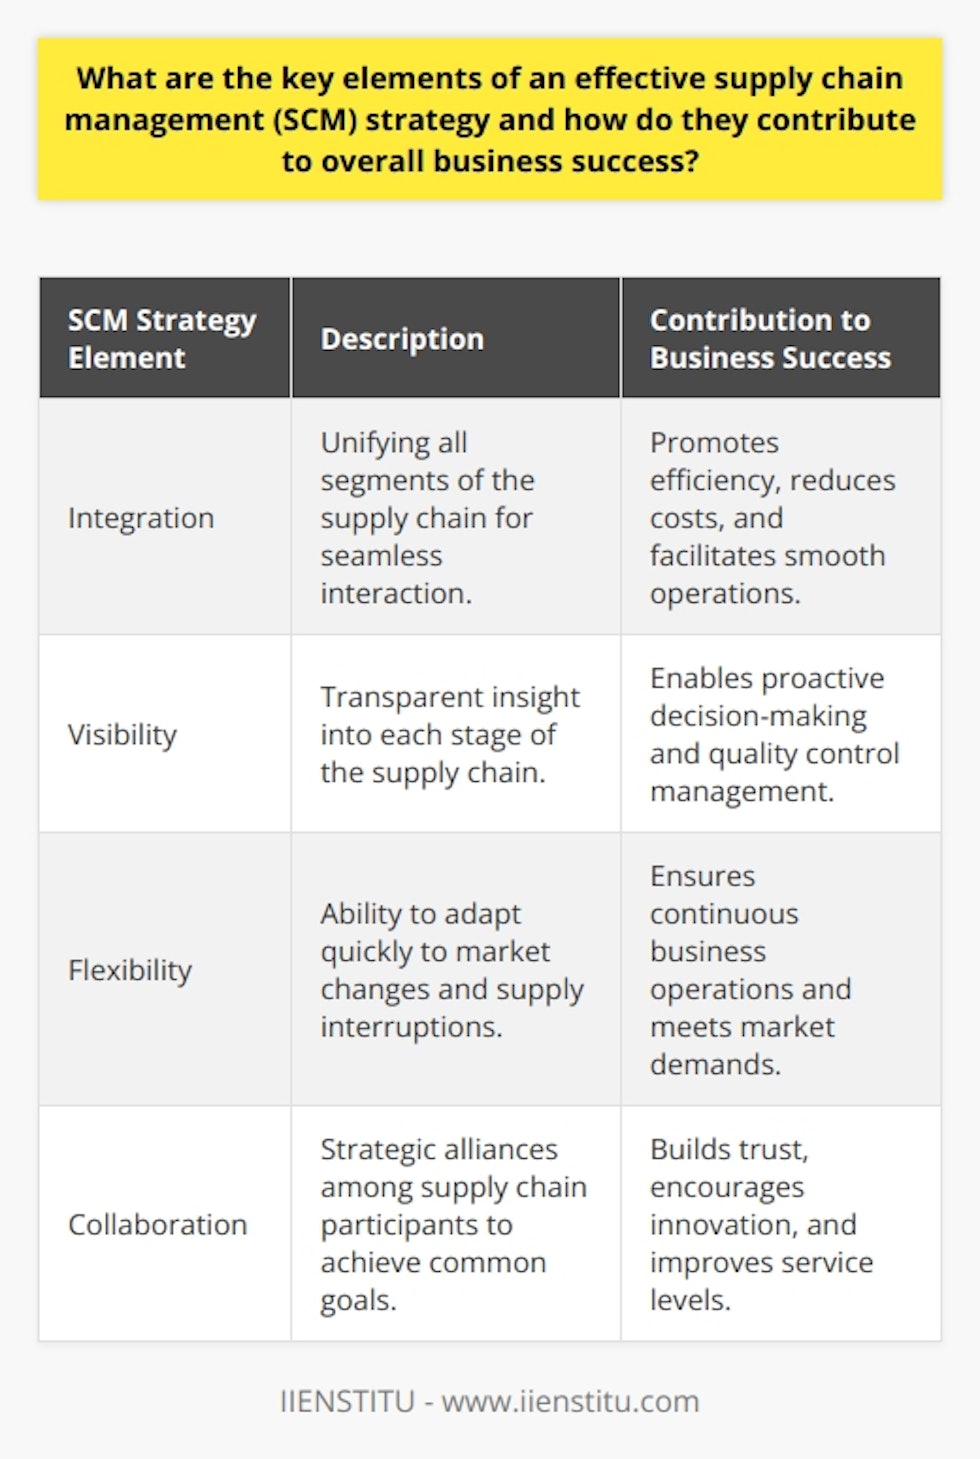 An effective supply chain management (SCM) strategy is essential for businesses to optimize their operations and thrive in a competitive marketplace. A proficient SCM strategy not only streamlines operations but also enables companies to respond swiftly to market dynamics and customer demands, driving enhanced performance and profitability. Here are the fundamental elements of a successful SCM strategy and their contributory roles to overarching business success:1. Integration: Comprehensive Approach to Connect the Dots Integration embodies the core concept of unifying all segments of the supply chain, from suppliers to end consumers, enabling seamless interactions and transactions. This holistic approach facilitates the coordination of activities such as sourcing, production, inventory management, and delivery. Integrated systems ensure that decision-makers have access to important data, promoting efficiency in logistics, reducing redundancies, and cutting costs. As a result, the interconnection of all links in the chain leads to an organized, cost-effective, and smooth-running supply chain.2. Visibility: Crystal-Clear Insight for Strategic Decision-MakingVisibility within SCM extends to gaining lucid insights into every facet of the supply chain, empowering businesses with the ability to anticipate and mitigate risks. Real-time data on inventory levels, transit times, and customer demand trends equip managers to make proactive adjustments to the production cycle, thus avoiding stockouts or excess capital tied up in unsold inventory. Moreover, visibility acts as a watchdog for quality control, ensuring products meet the required standards at each stage from inception to delivery.3. Flexibility: Agile Adaptation to Market FluctuationsThe current business landscape, marked by volatility and rapid changes, demands that companies exhibit flexibility in their supply chain operations. This adaptability is fundamental for an organization's capability to pivot and respond adeptly to supply interruptions, demand variability, and changing market trends. Flexibility allows businesses to reconfigure their supply chain setup quickly, whether it means finding alternative suppliers, scaling production up or down, or exploring new distribution channels, thereby ensuring business continuity.4. Collaboration: Synergistic Partnership for Mutual SuccessCollaboration in SCM is the strategic alliance amongst all parties involved, from suppliers to end-users, to work conjointly toward common objectives. By sharing knowledge, expertise, and resources, partners can innovate, streamline processes, and resolve complex challenges more efficiently. Collaboration leads to trust-building and the development of a more resilient and responsive supply chain network. Joint planning and problem resolution are hallmarks of collaborative efforts, which ultimately enhance service levels and customer satisfaction.These elements—integration, visibility, flexibility, and collaboration—form the bedrock of any robust SCM strategy. When executed effectively, they can lead to improved operational performance, increased responsiveness to market needs, reduced operational costs, and a distinctive competitive advantage. Thus, SCM is not only about managing the flow of goods and information but also about fostering a synchronized network that is primed for success in a dynamic business environment.To support such a strategy, educational institutions like IIENSTITU offer targeted training and courses designed to equip future supply chain professionals with the knowledge and skills necessary to implement these crucial elements. By blending theory with practical applications, programs offered can empower individuals to drive SCM strategies that align with current industry needs and future advancements.